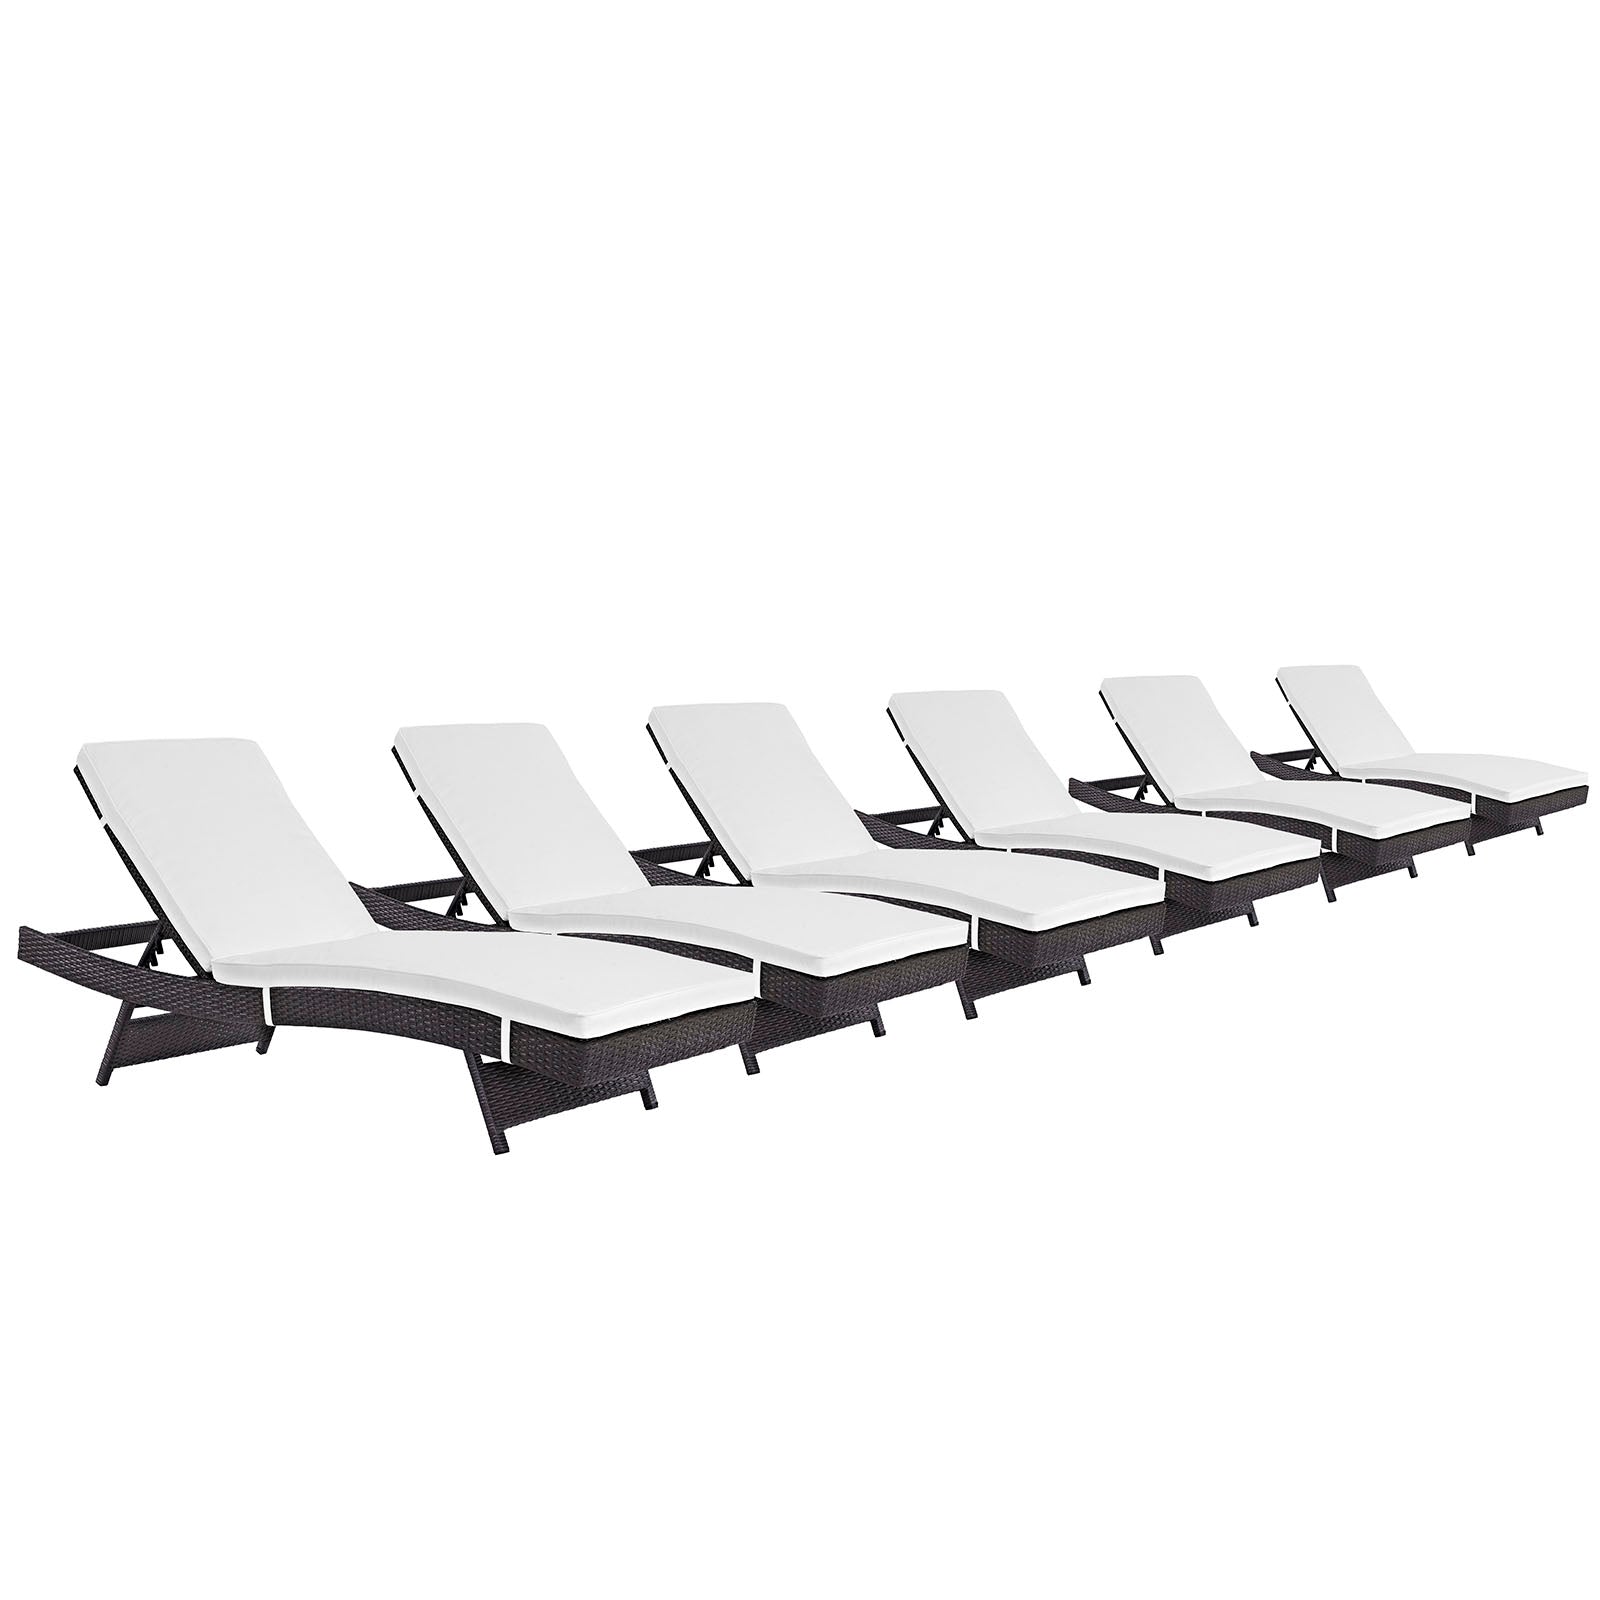 Modway Outdoor Loungers - Convene Chaise Outdoor Patio Set of 6 Espresso White